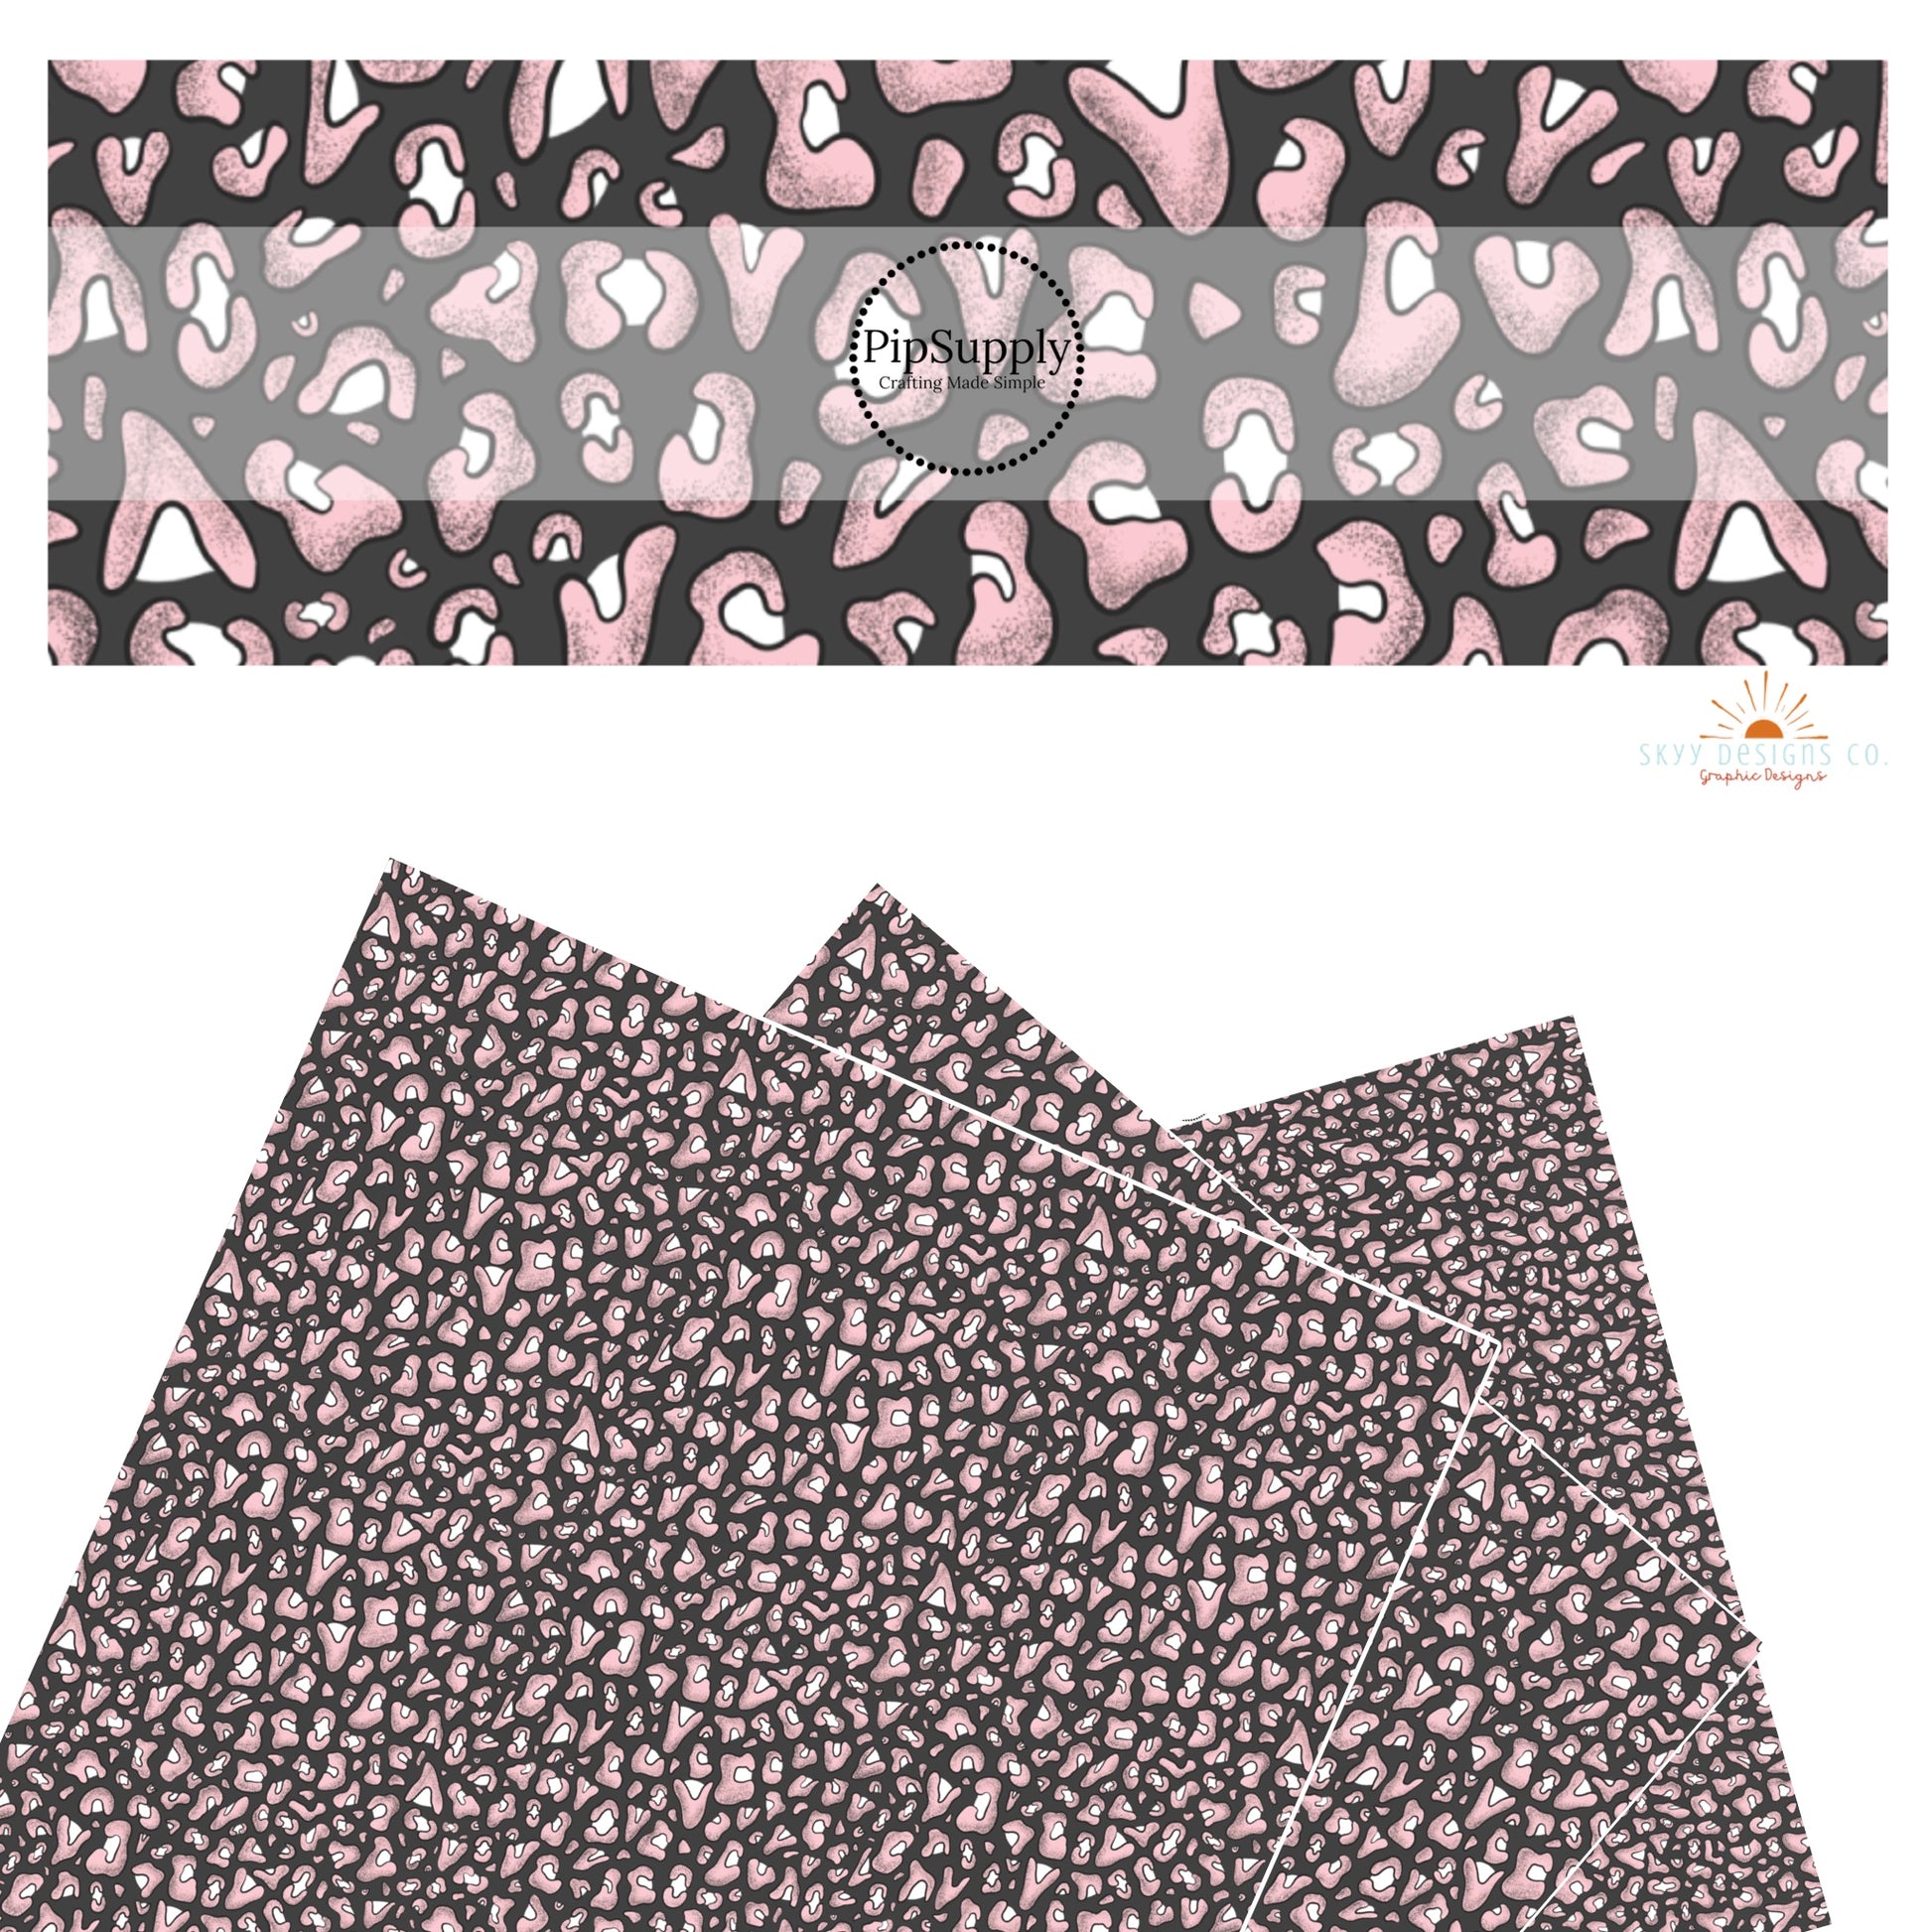 Pink and white leopard print on charcoal faux leather sheets